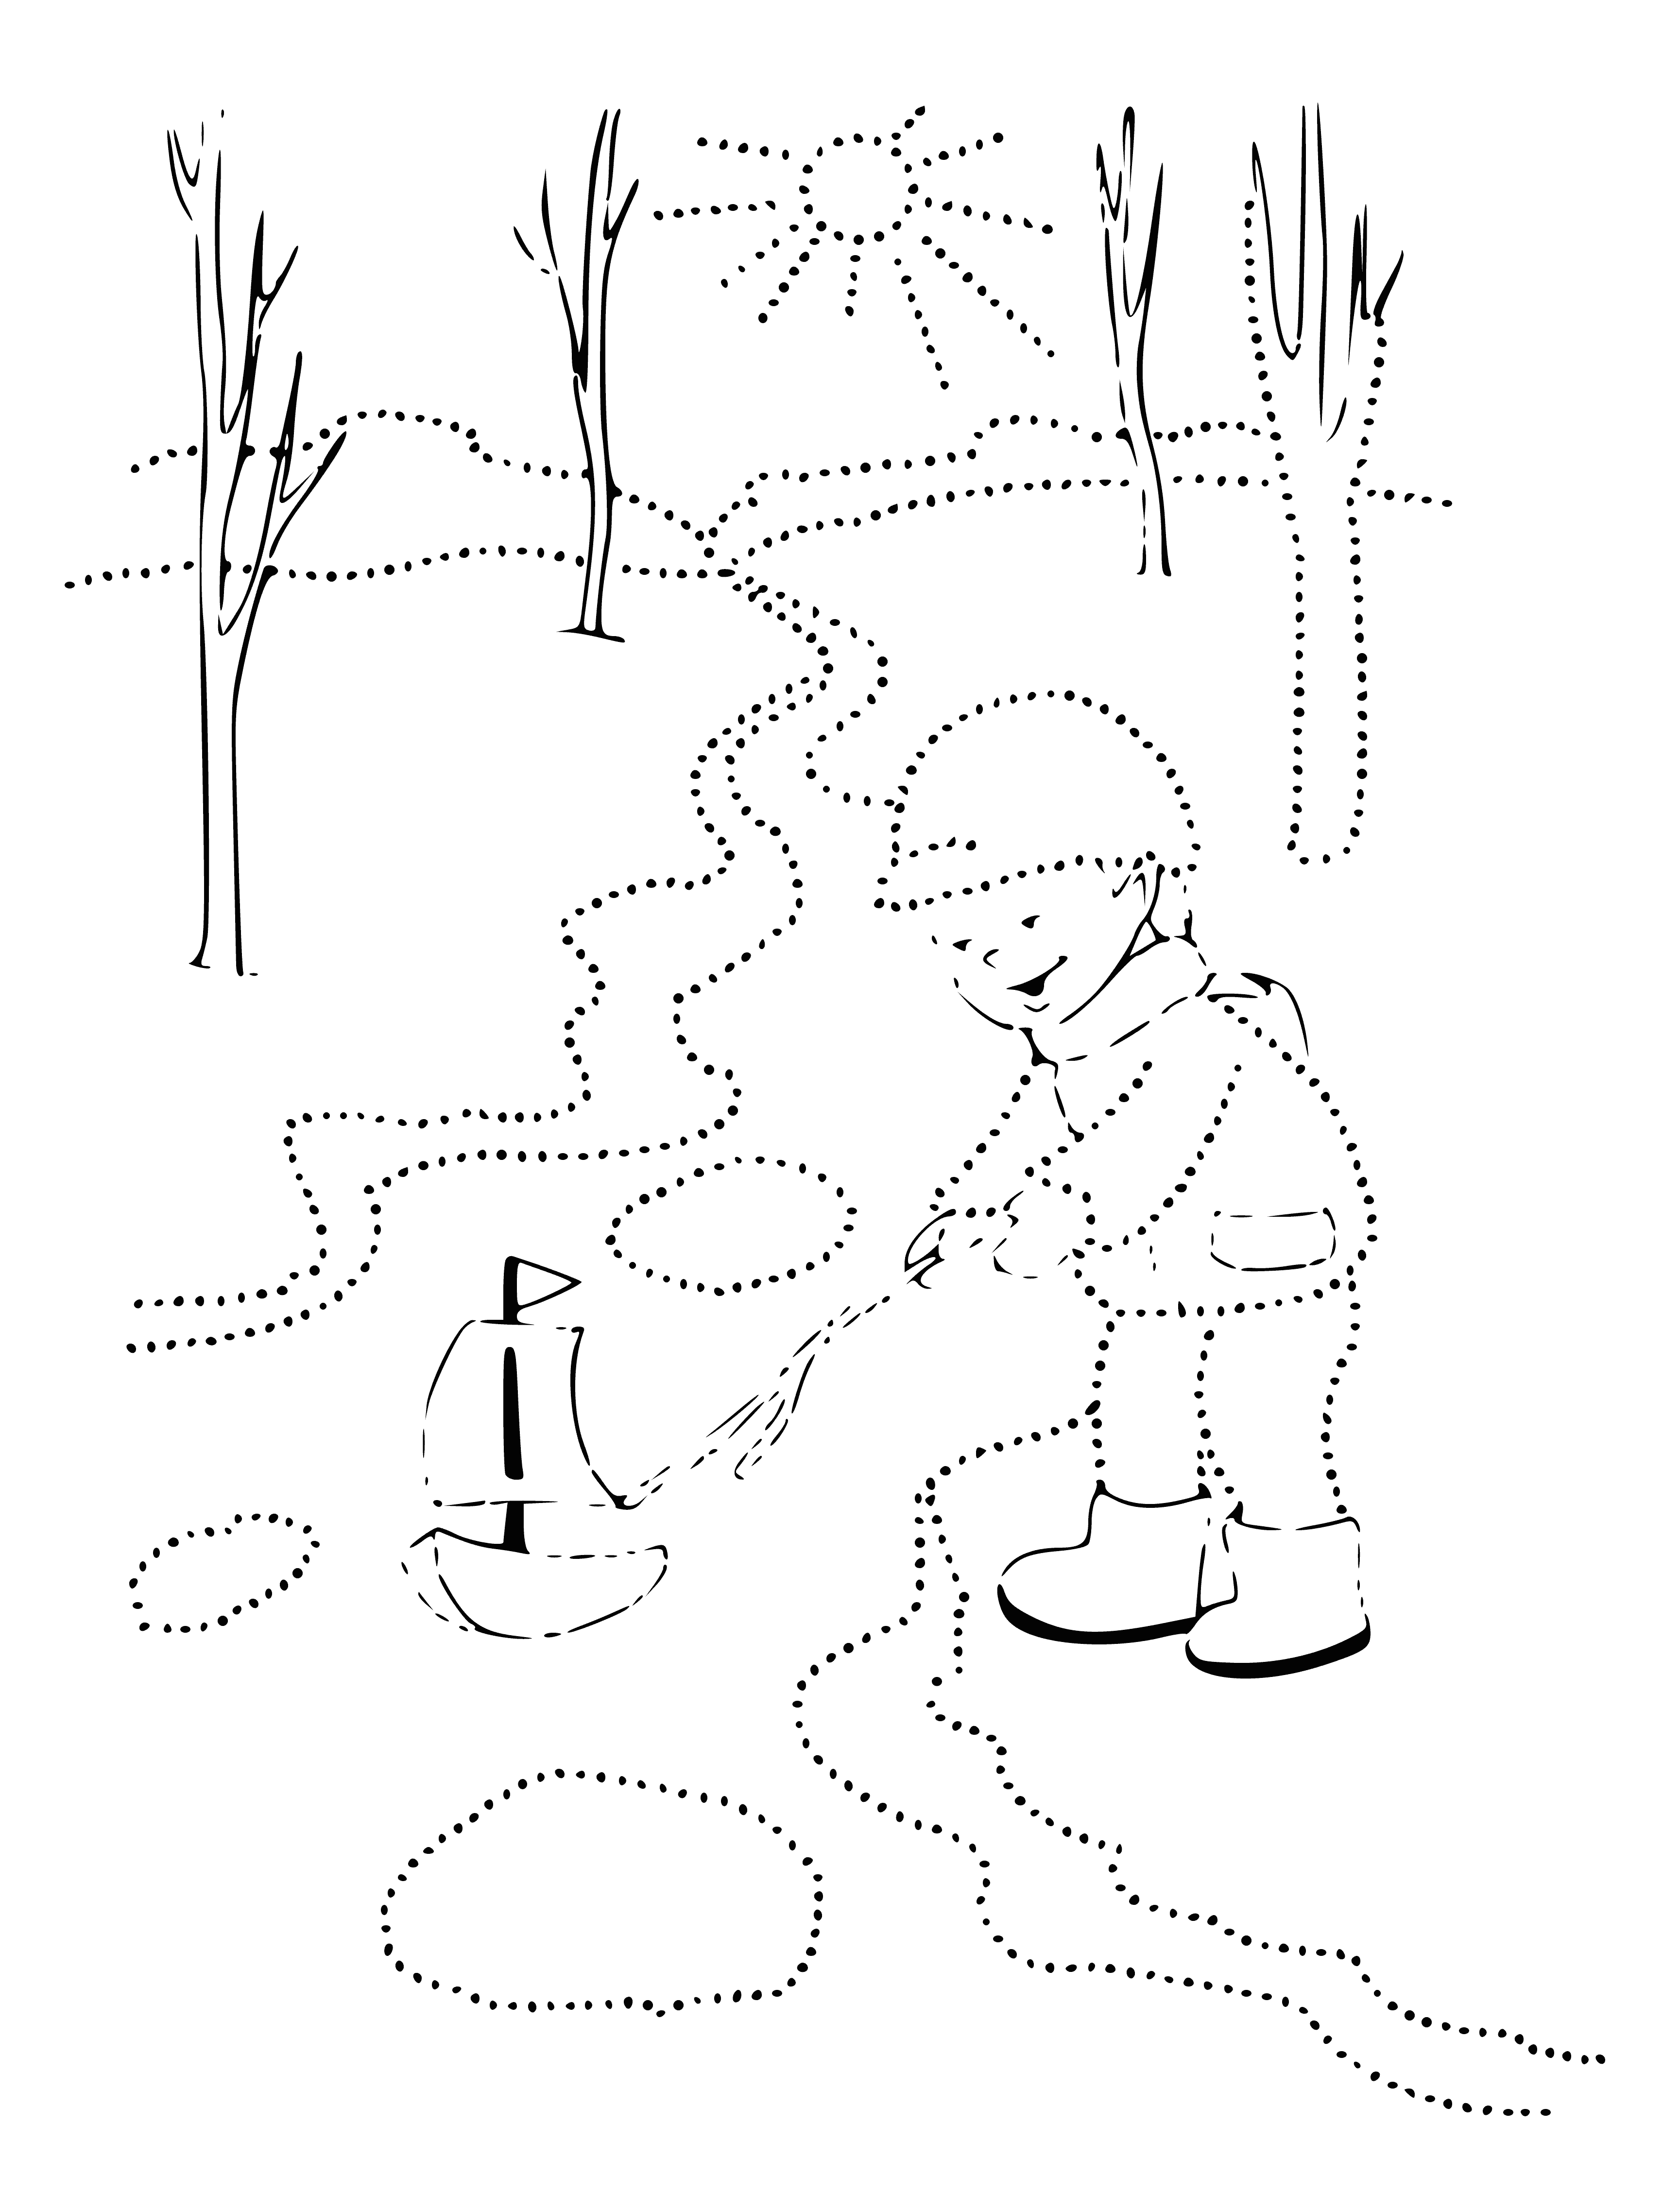 The ship sails along the stream coloring page